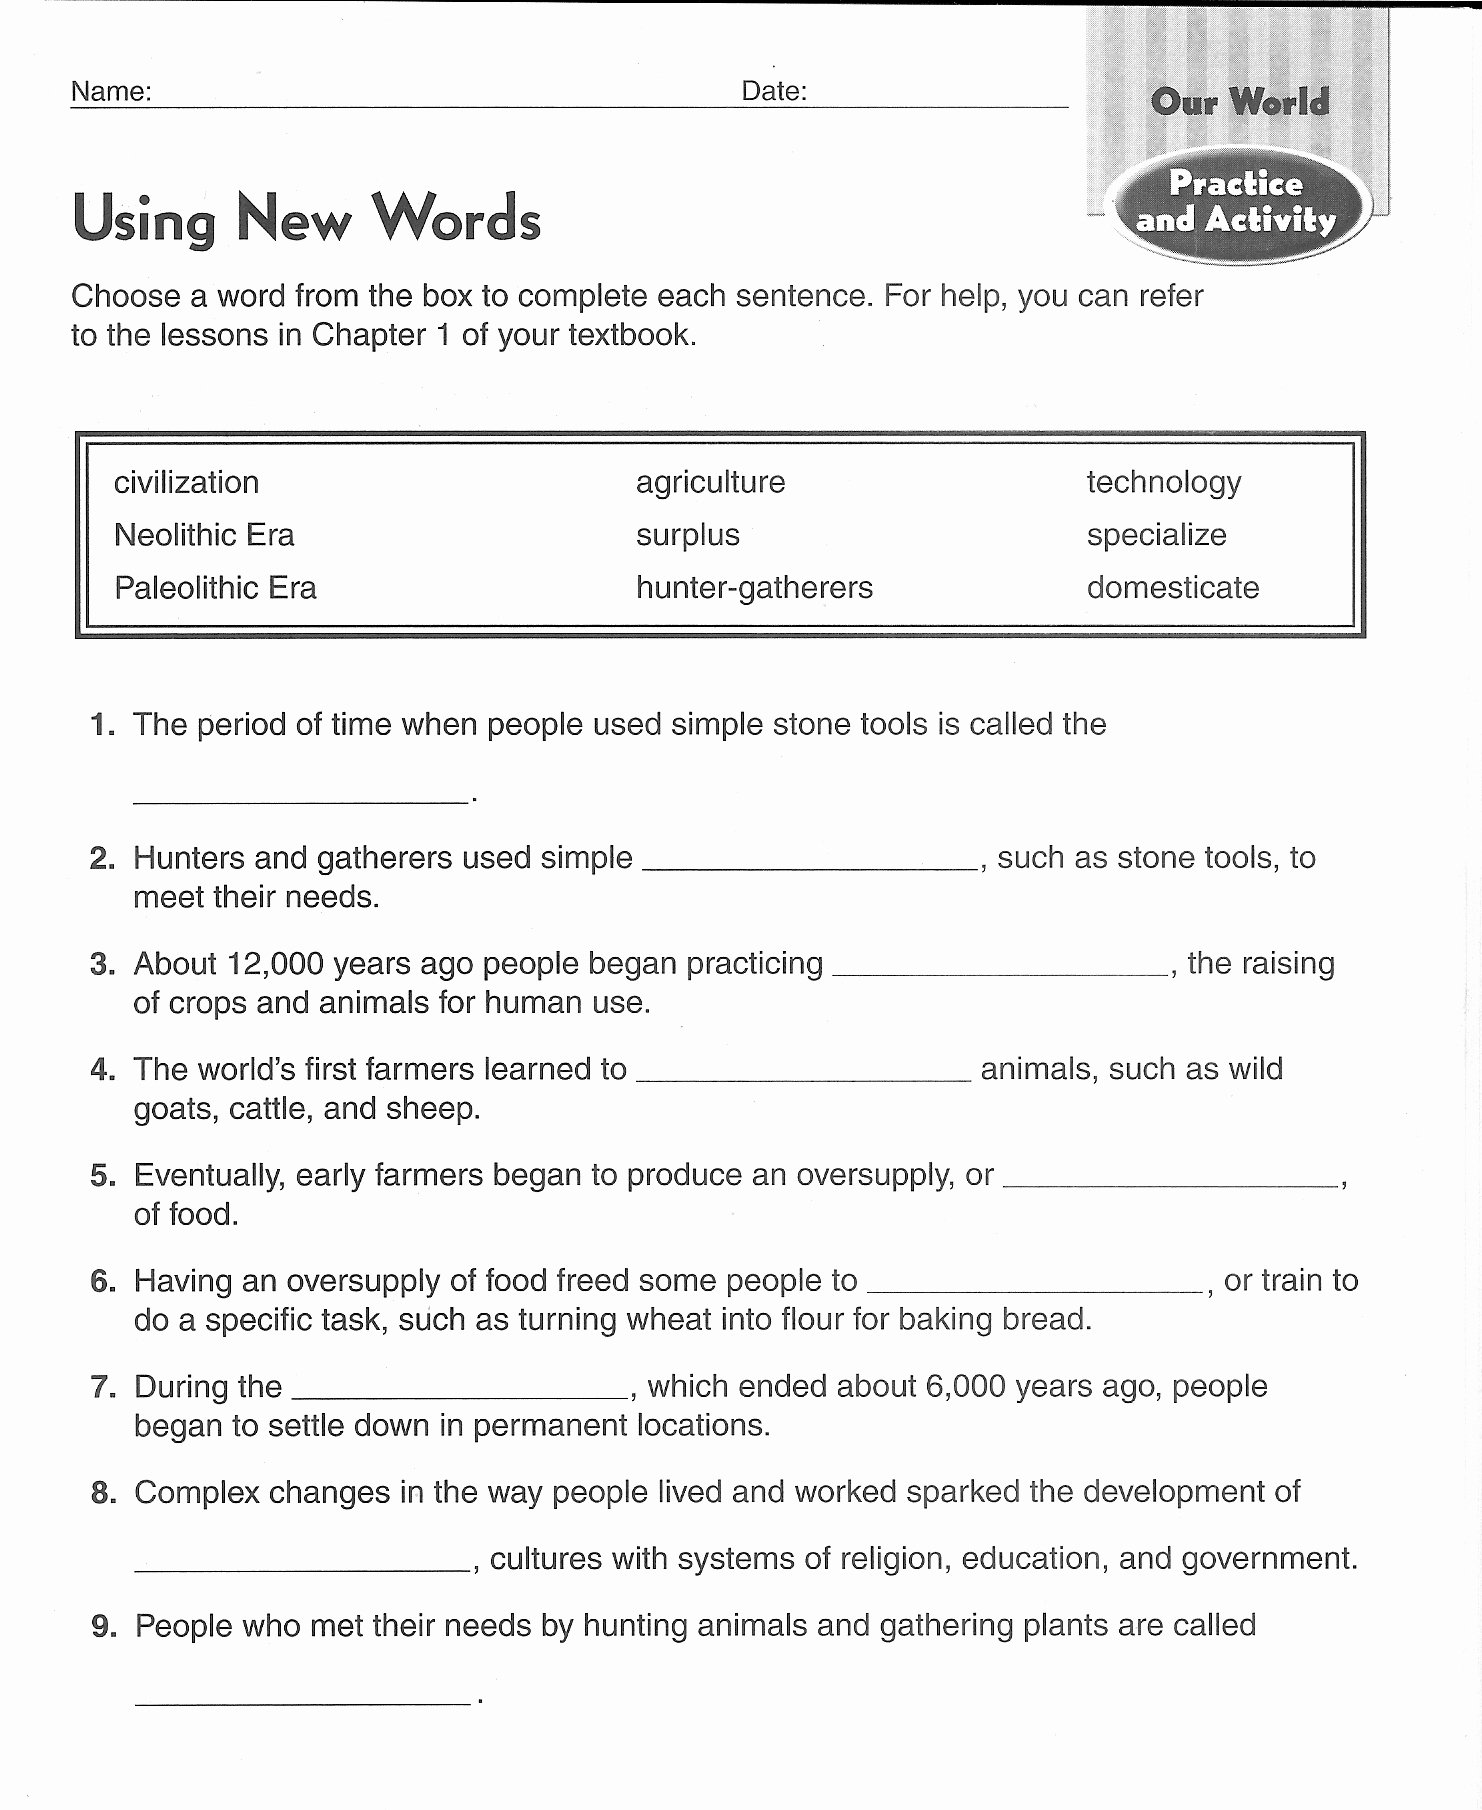 River Valley Civilizations Worksheet Answers New River Valley Civilizations Worksheet Answer Key